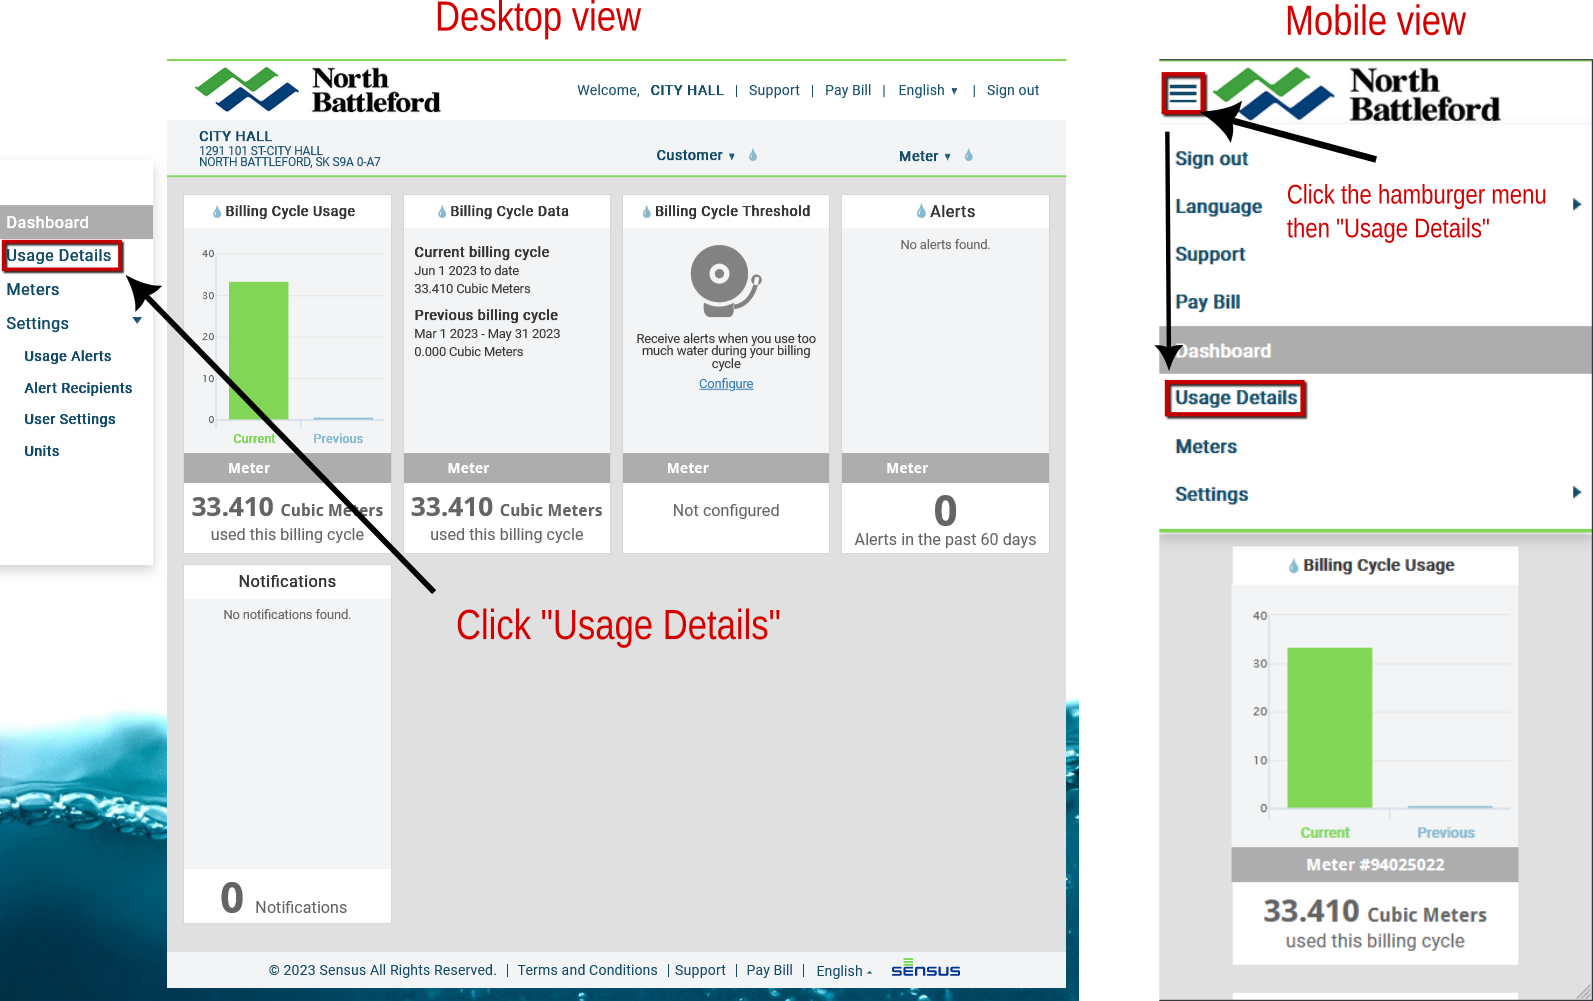 A screenshot of both the destop and mobile view showing where to find the Usage Details button